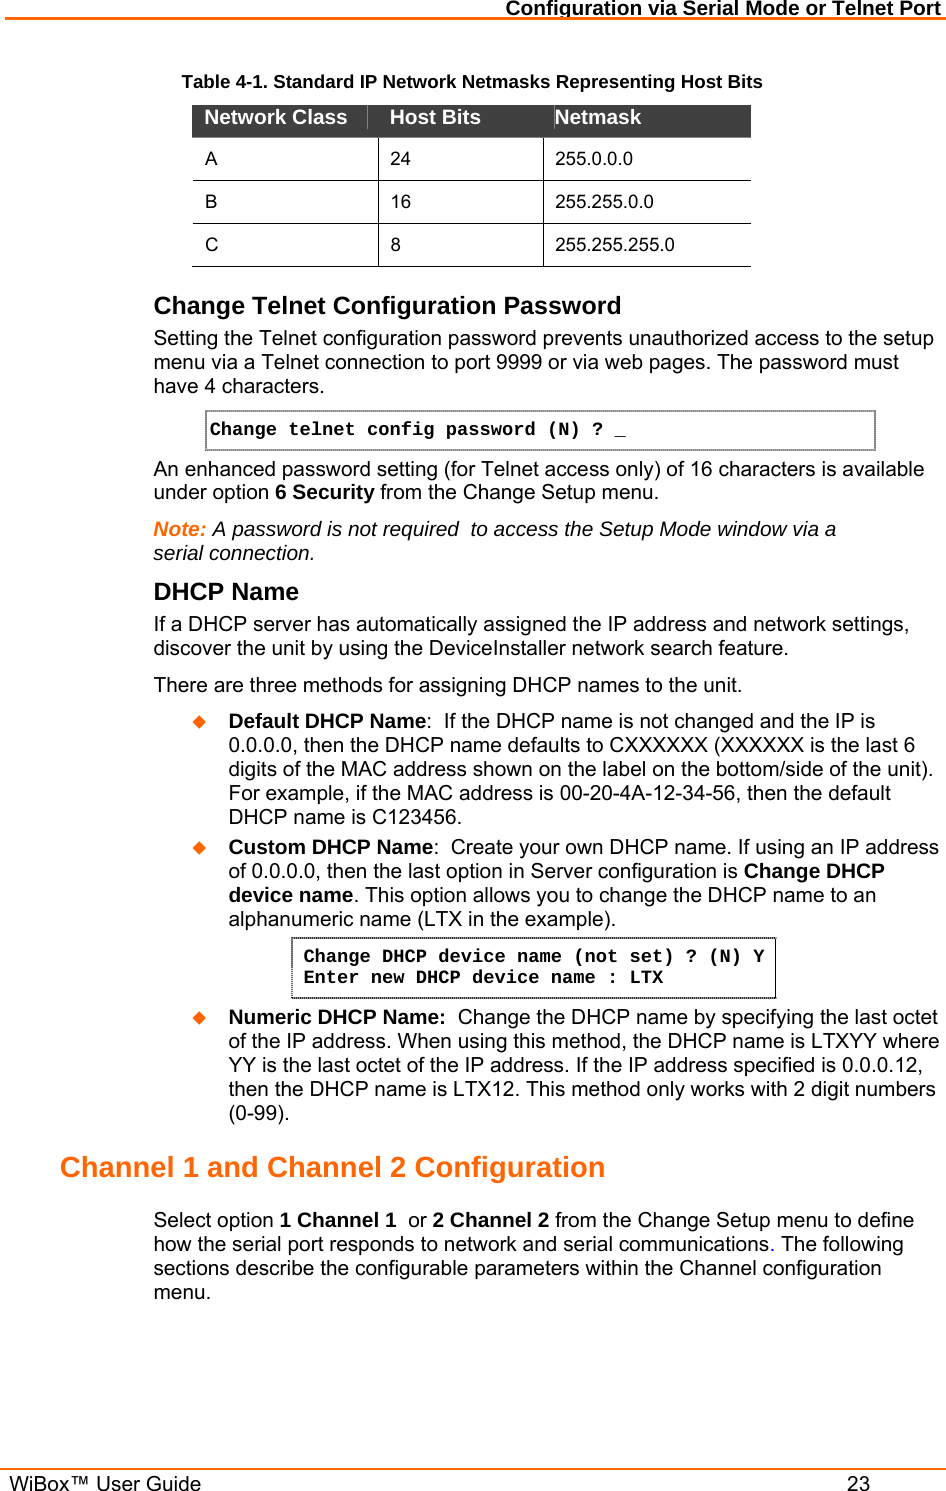 Configuration via Serial Mode or Telnet Port  WiBox™ User Guide  23 Table 4-1. Standard IP Network Netmasks Representing Host Bits Network Class  Host Bits   Netmask  A 24 255.0.0.0 B 16 255.255.0.0 C 8 255.255.255.0 Change Telnet Configuration Password Setting the Telnet configuration password prevents unauthorized access to the setup menu via a Telnet connection to port 9999 or via web pages. The password must have 4 characters. Change telnet config password (N) ? _   An enhanced password setting (for Telnet access only) of 16 characters is available under option 6 Security from the Change Setup menu. Note: A password is not required  to access the Setup Mode window via a serial connection.  DHCP Name  If a DHCP server has automatically assigned the IP address and network settings, discover the unit by using the DeviceInstaller network search feature. There are three methods for assigning DHCP names to the unit.  Default DHCP Name:  If the DHCP name is not changed and the IP is 0.0.0.0, then the DHCP name defaults to CXXXXXX (XXXXXX is the last 6 digits of the MAC address shown on the label on the bottom/side of the unit). For example, if the MAC address is 00-20-4A-12-34-56, then the default DHCP name is C123456.  Custom DHCP Name:  Create your own DHCP name. If using an IP address of 0.0.0.0, then the last option in Server configuration is Change DHCP device name. This option allows you to change the DHCP name to an alphanumeric name (LTX in the example). Change DHCP device name (not set) ? (N) Y  Enter new DHCP device name : LTX  Numeric DHCP Name:  Change the DHCP name by specifying the last octet of the IP address. When using this method, the DHCP name is LTXYY where YY is the last octet of the IP address. If the IP address specified is 0.0.0.12, then the DHCP name is LTX12. This method only works with 2 digit numbers (0-99). Channel 1 and Channel 2 Configuration  Select option 1 Channel 1  or 2 Channel 2 from the Change Setup menu to define how the serial port responds to network and serial communications. The following sections describe the configurable parameters within the Channel configuration menu. 